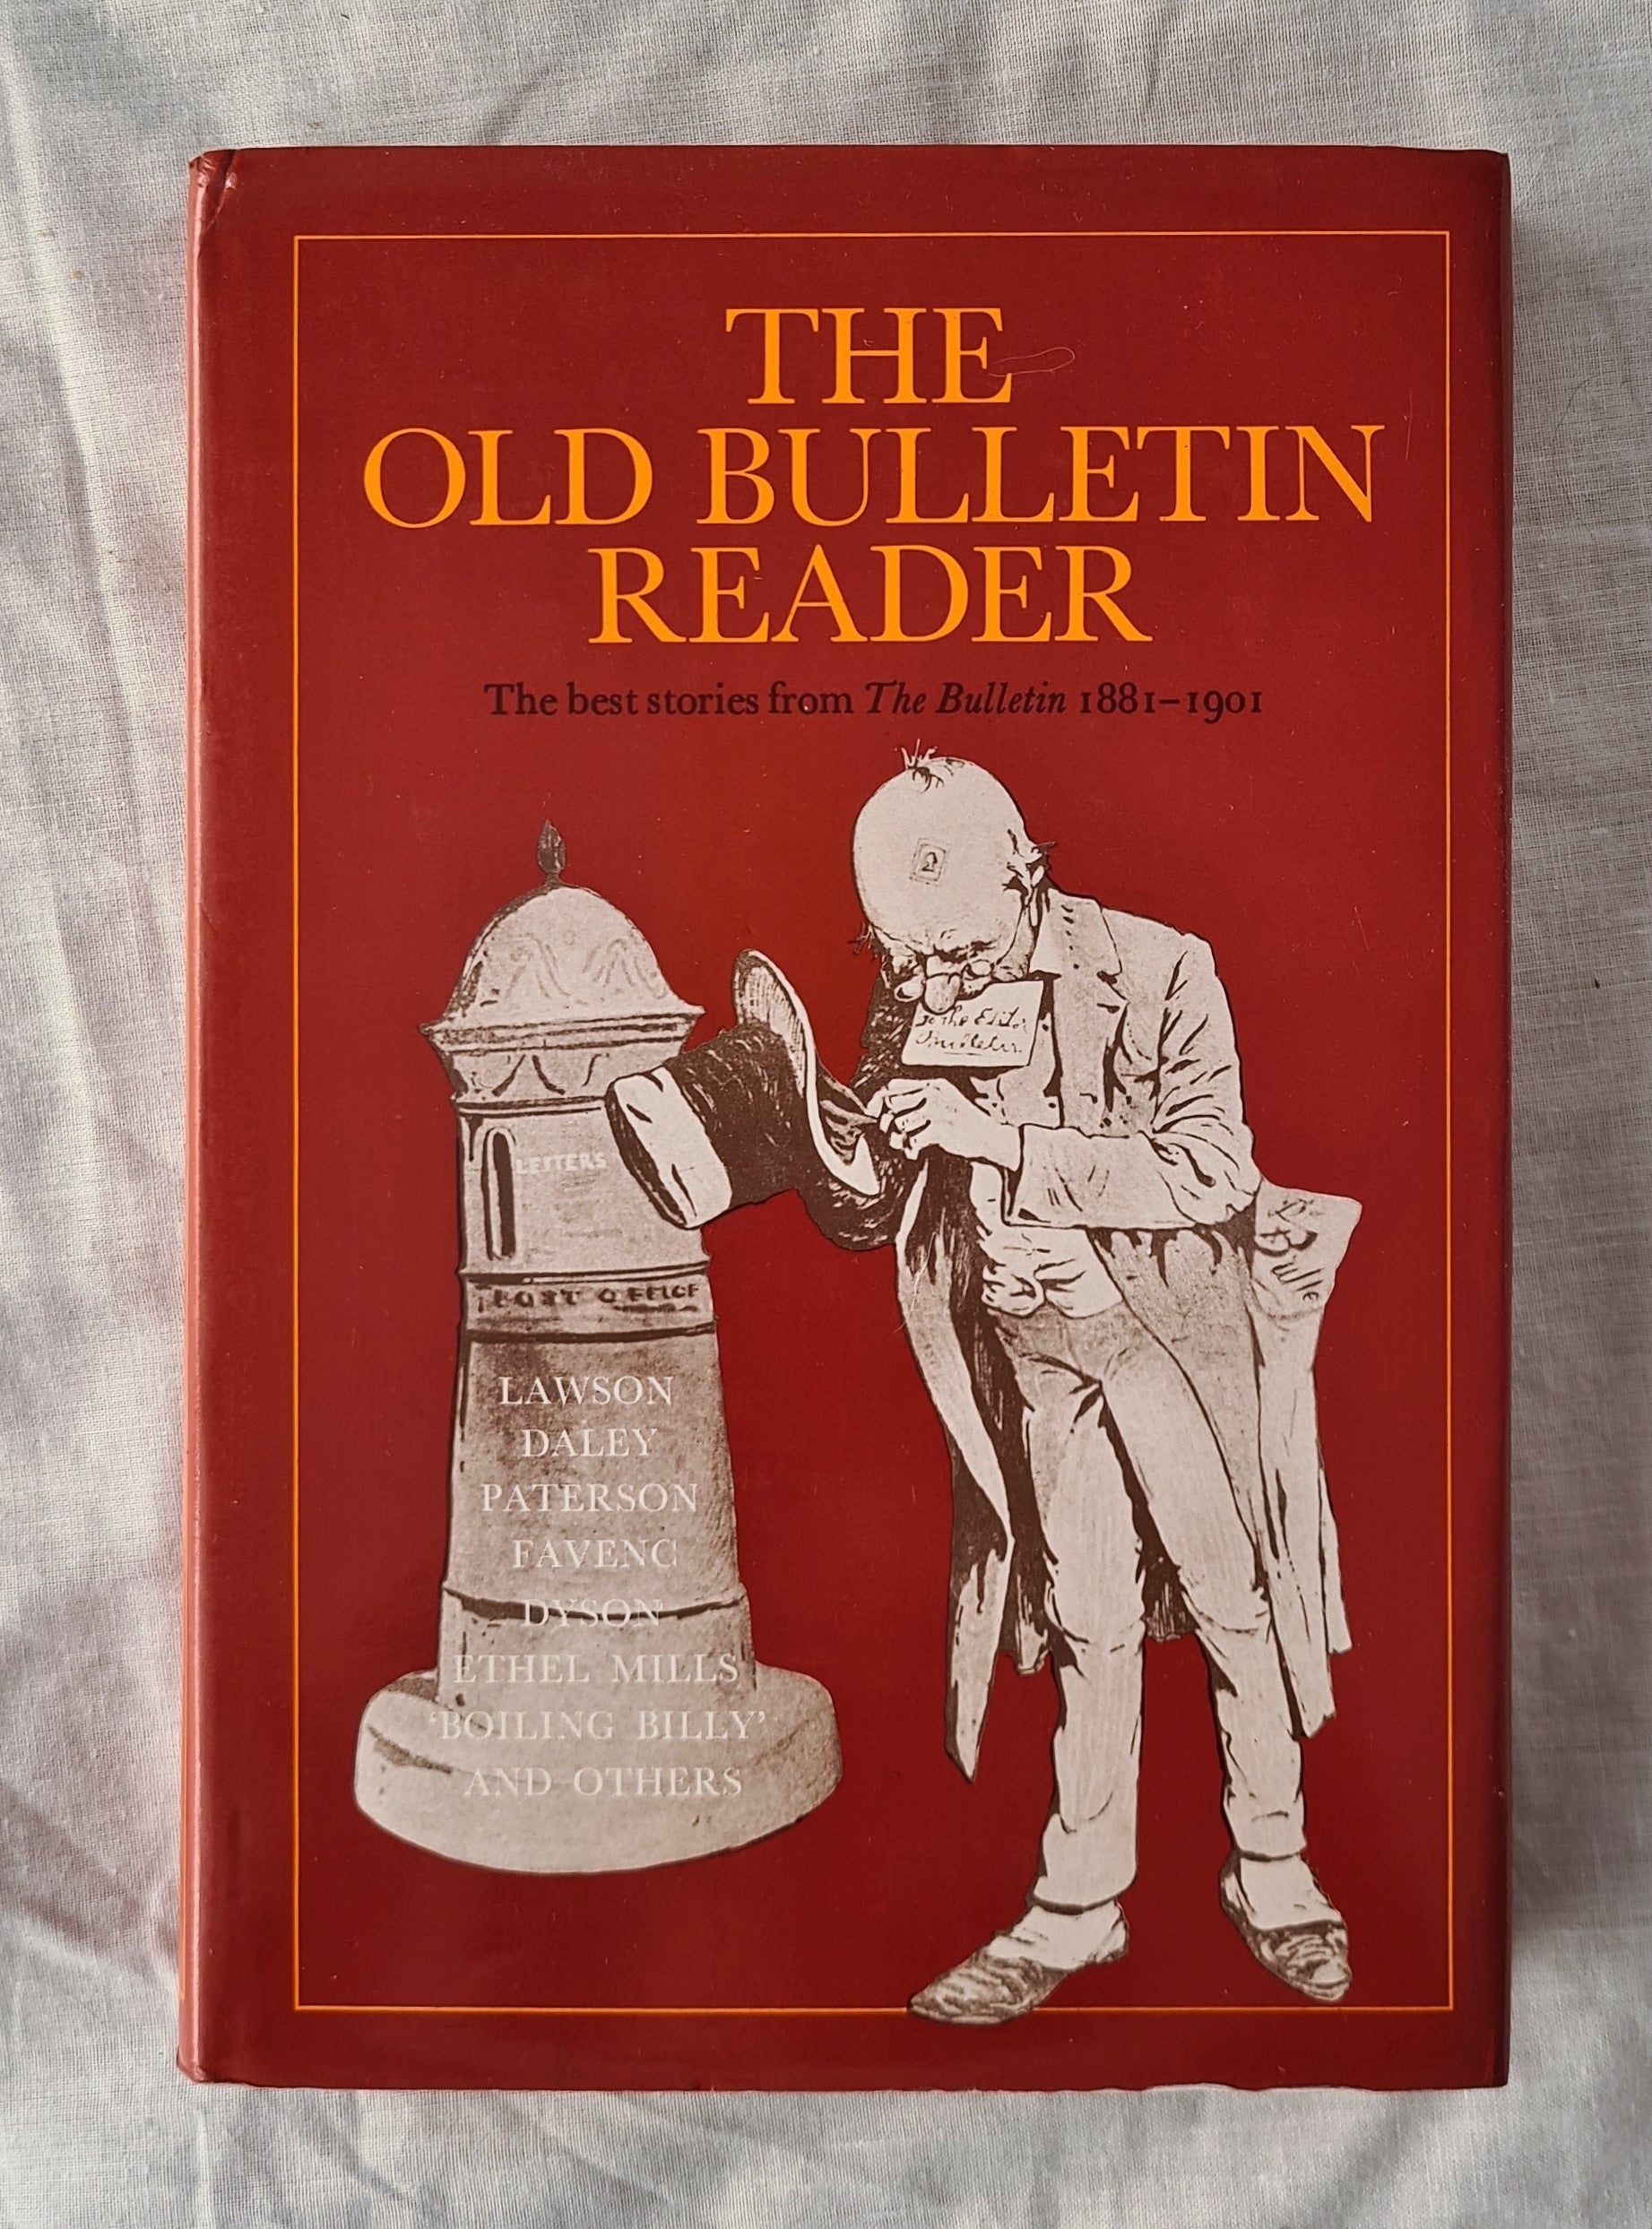 The Old Bulletin Reader  The best stories from The Bulletin 1881-1901